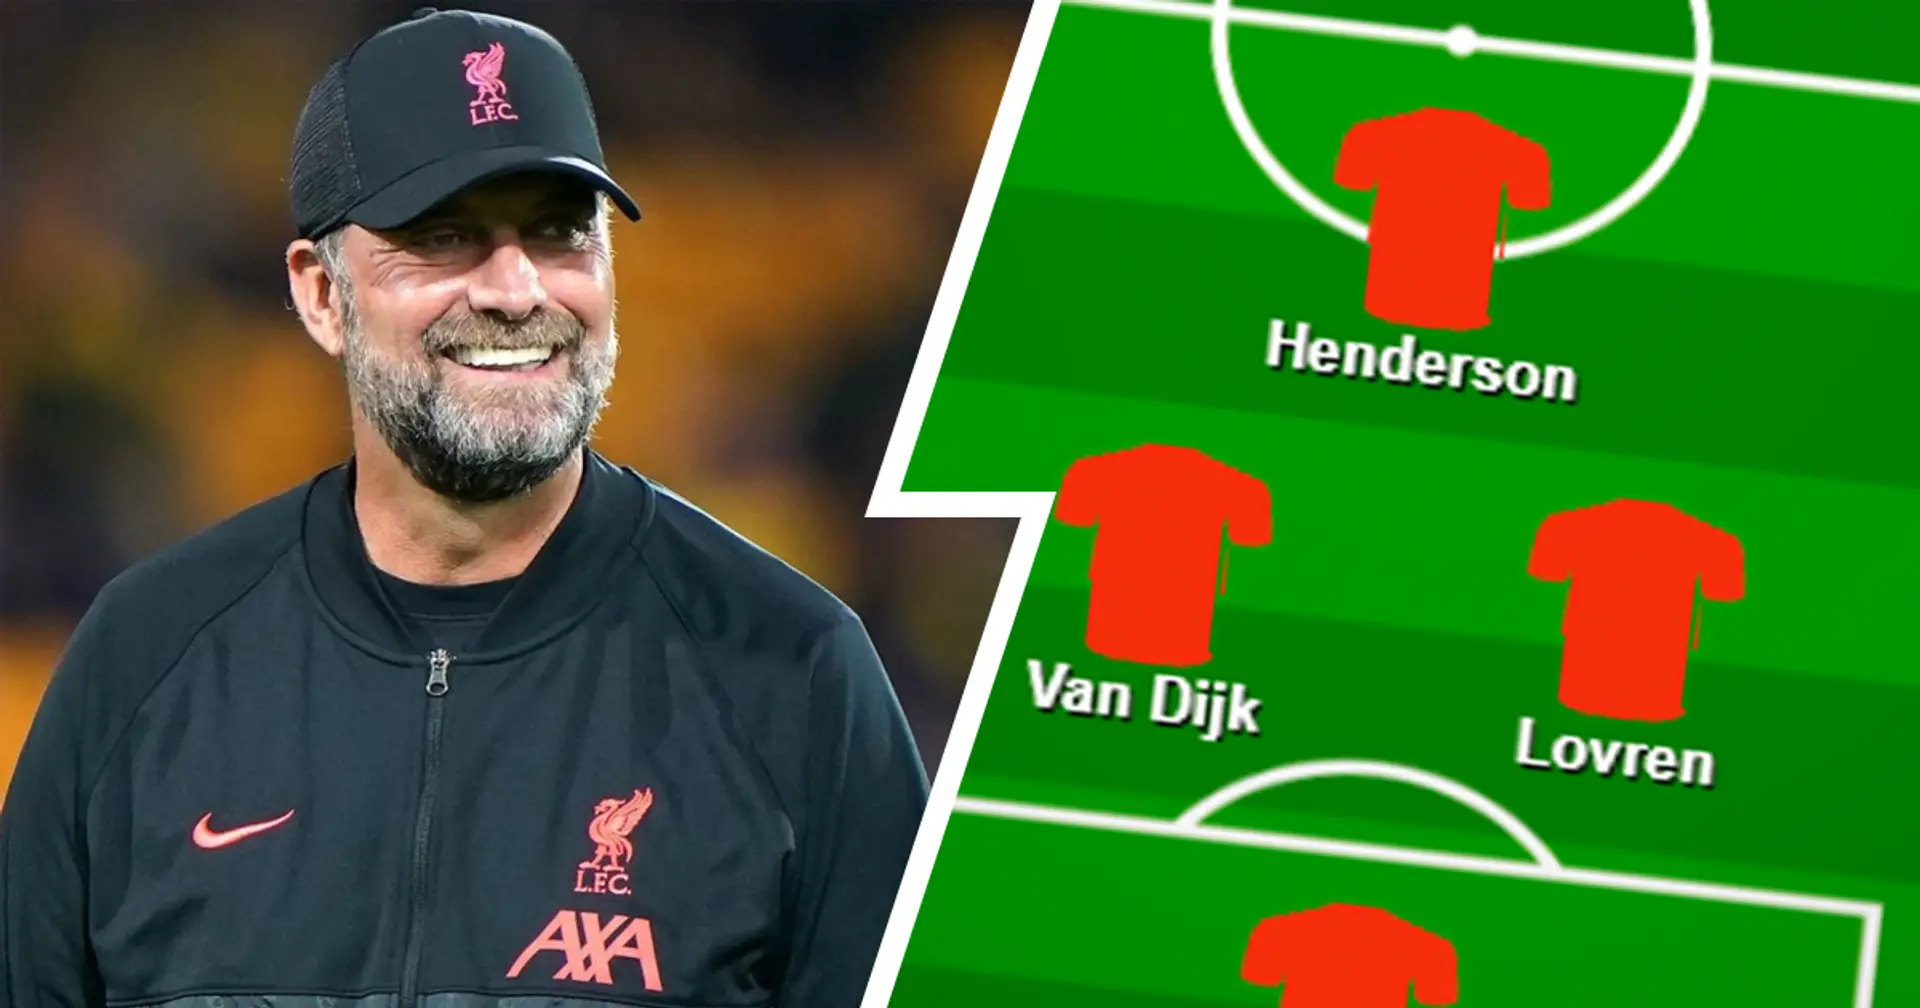 Lovren at the back and fabulous front three: Jurgen Klopp's most-used XI in 6 years at Liverpool